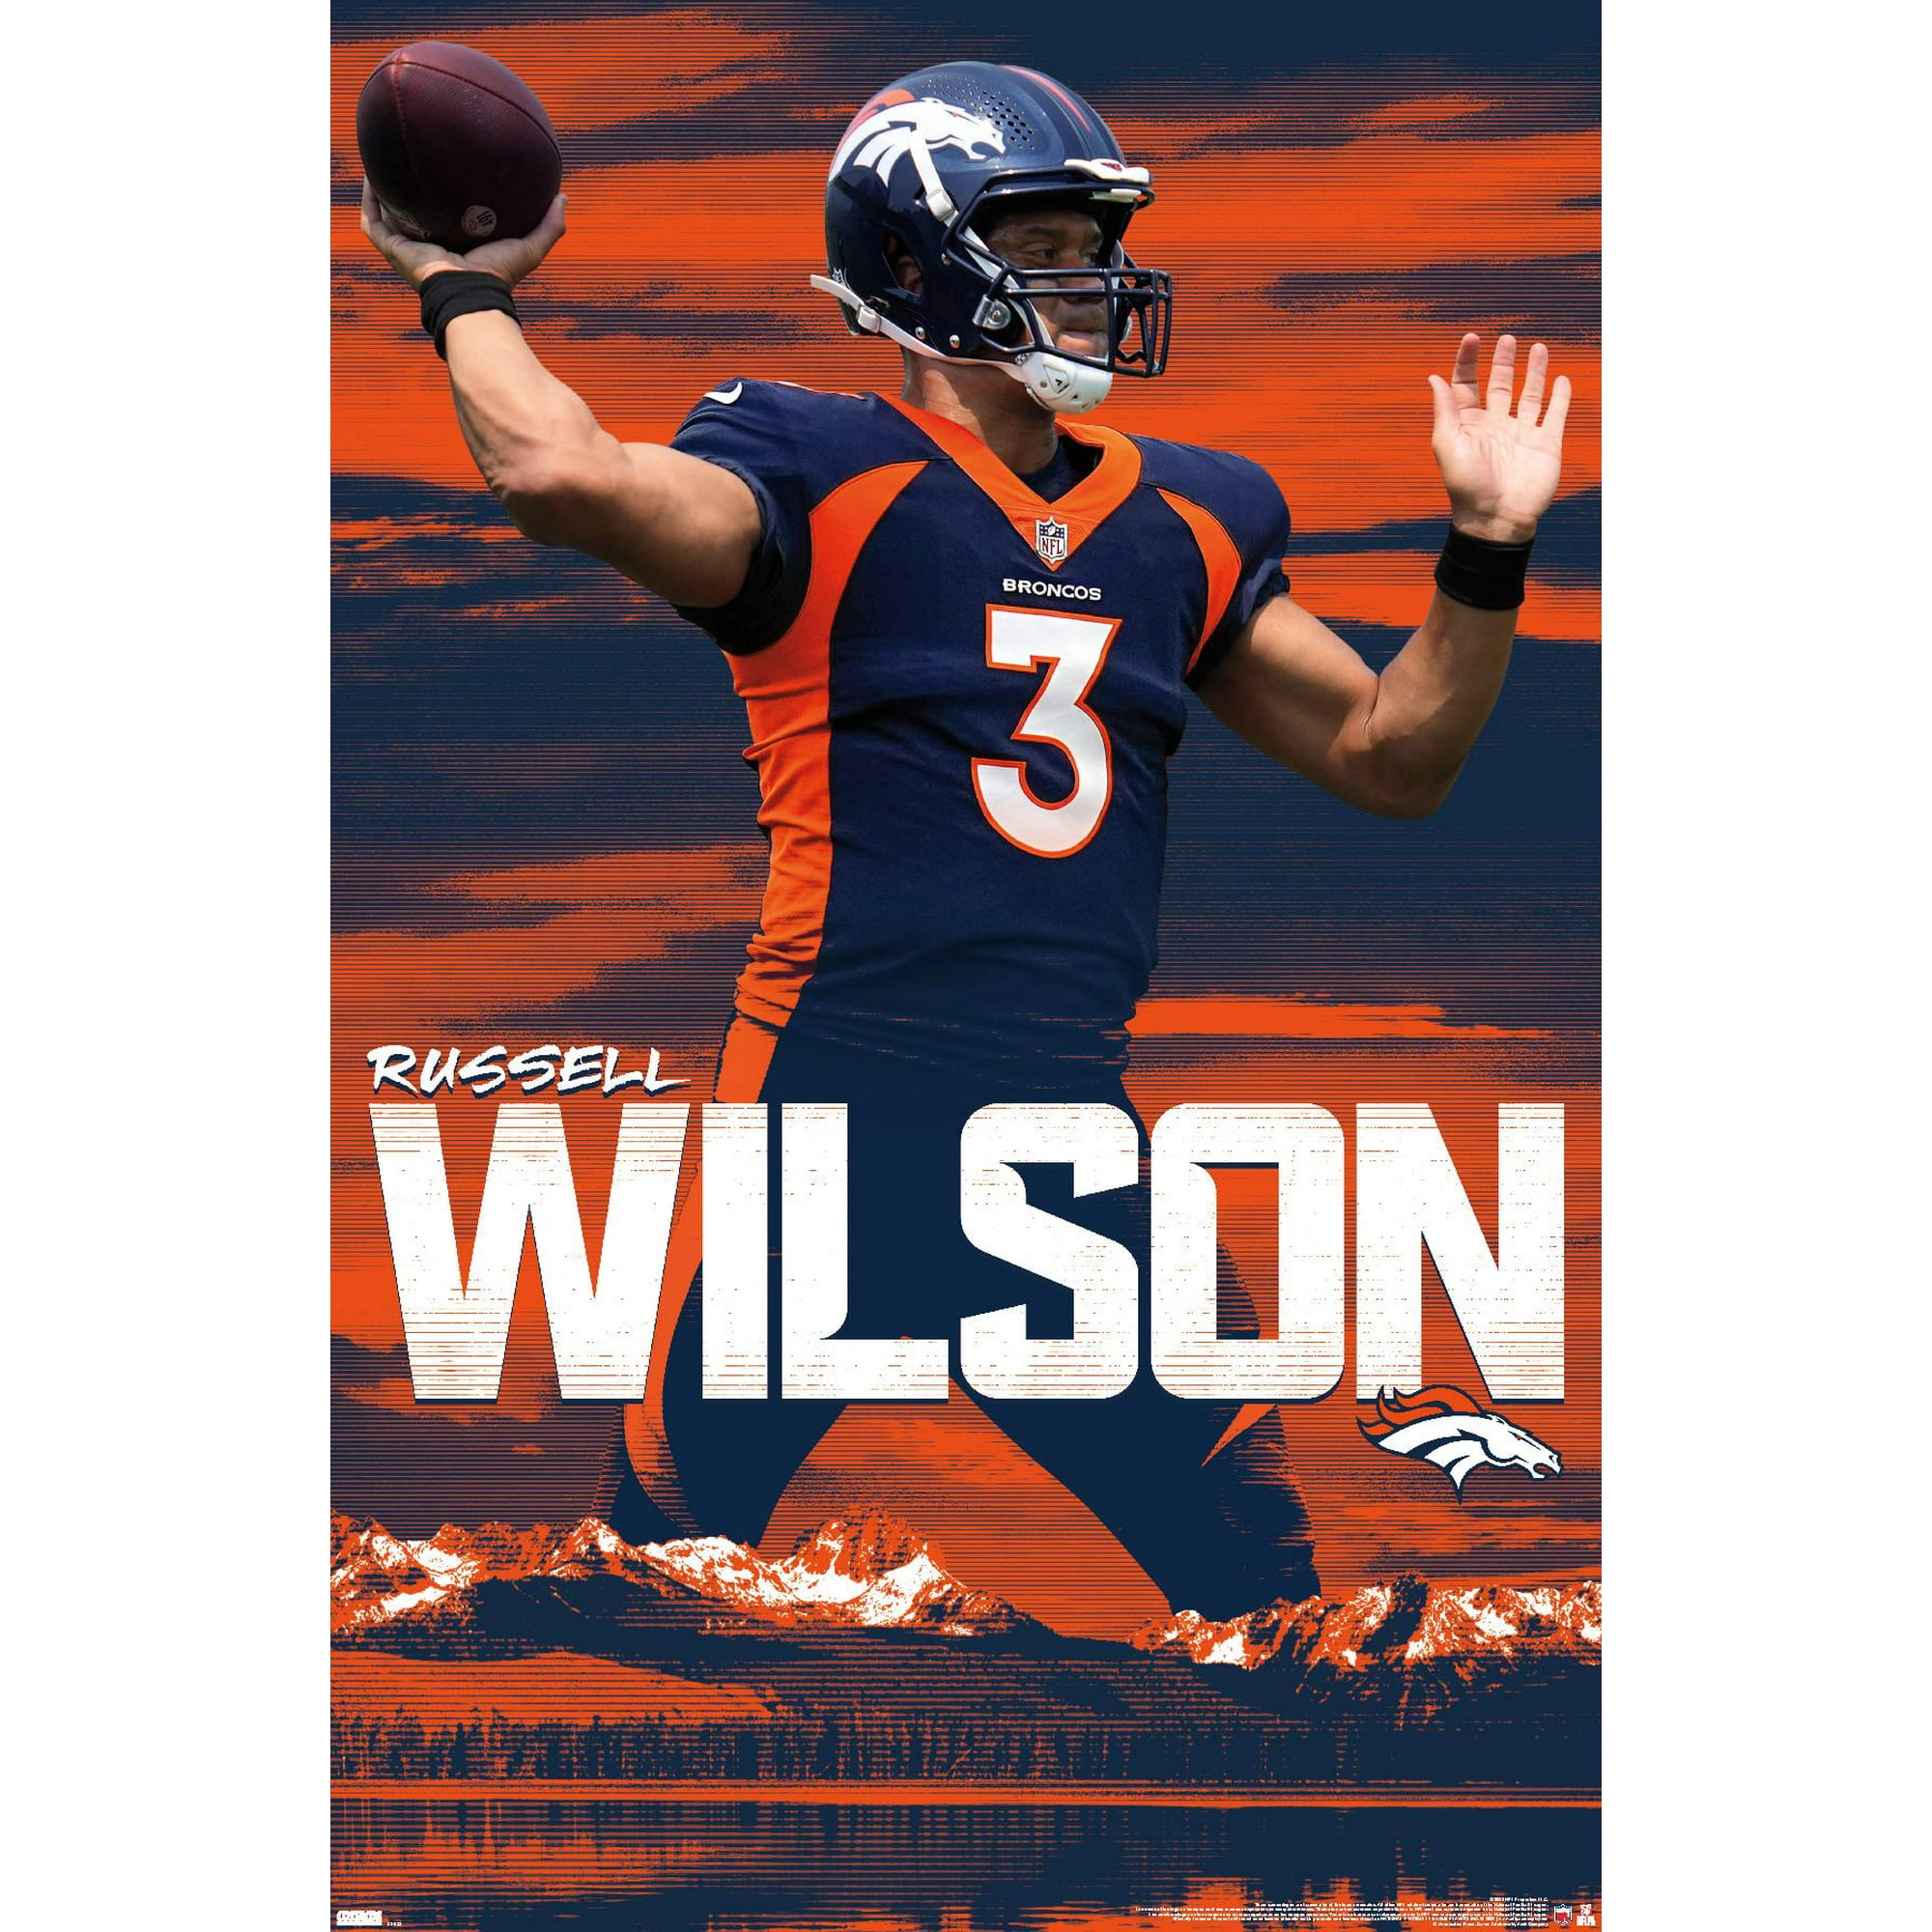 NFL Denver Broncos - Russell Wilson 22 Wall Poster, 22.375 x 34